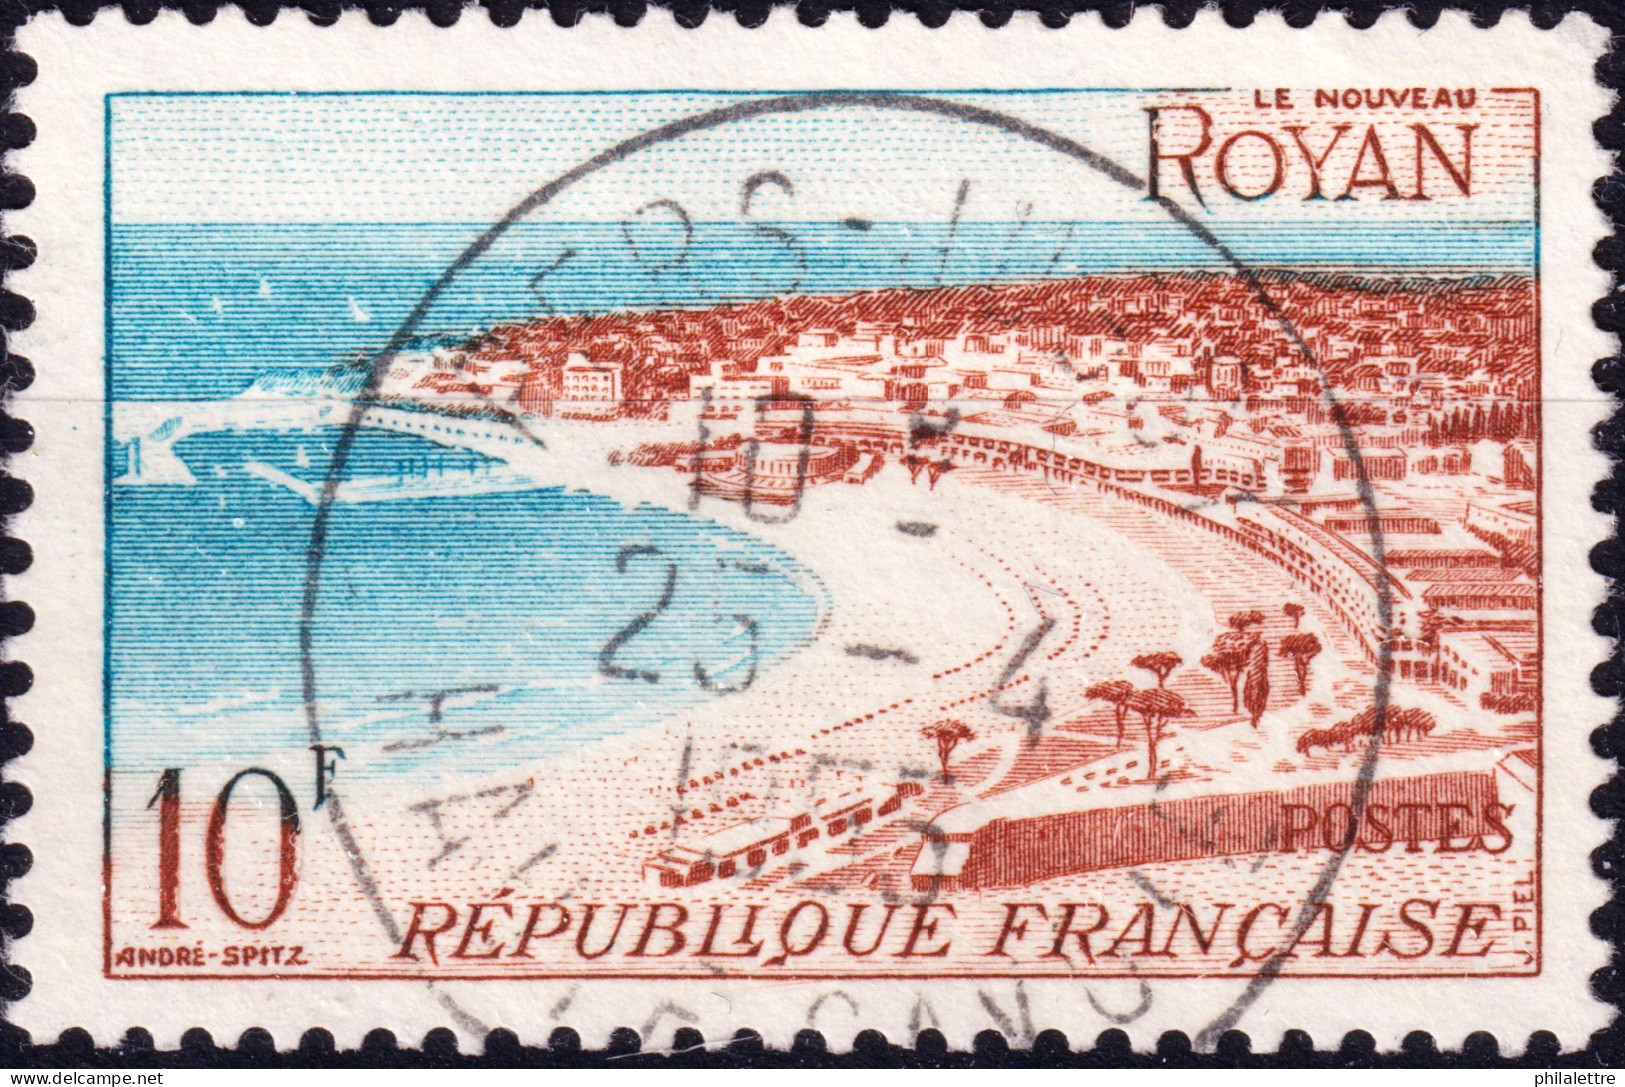 FRANCE - 1955 TàD "PERS-JUSSY / HAUTE SAVOIE" (type A7) Sur Yv.978 10fr Royan - Used Stamps